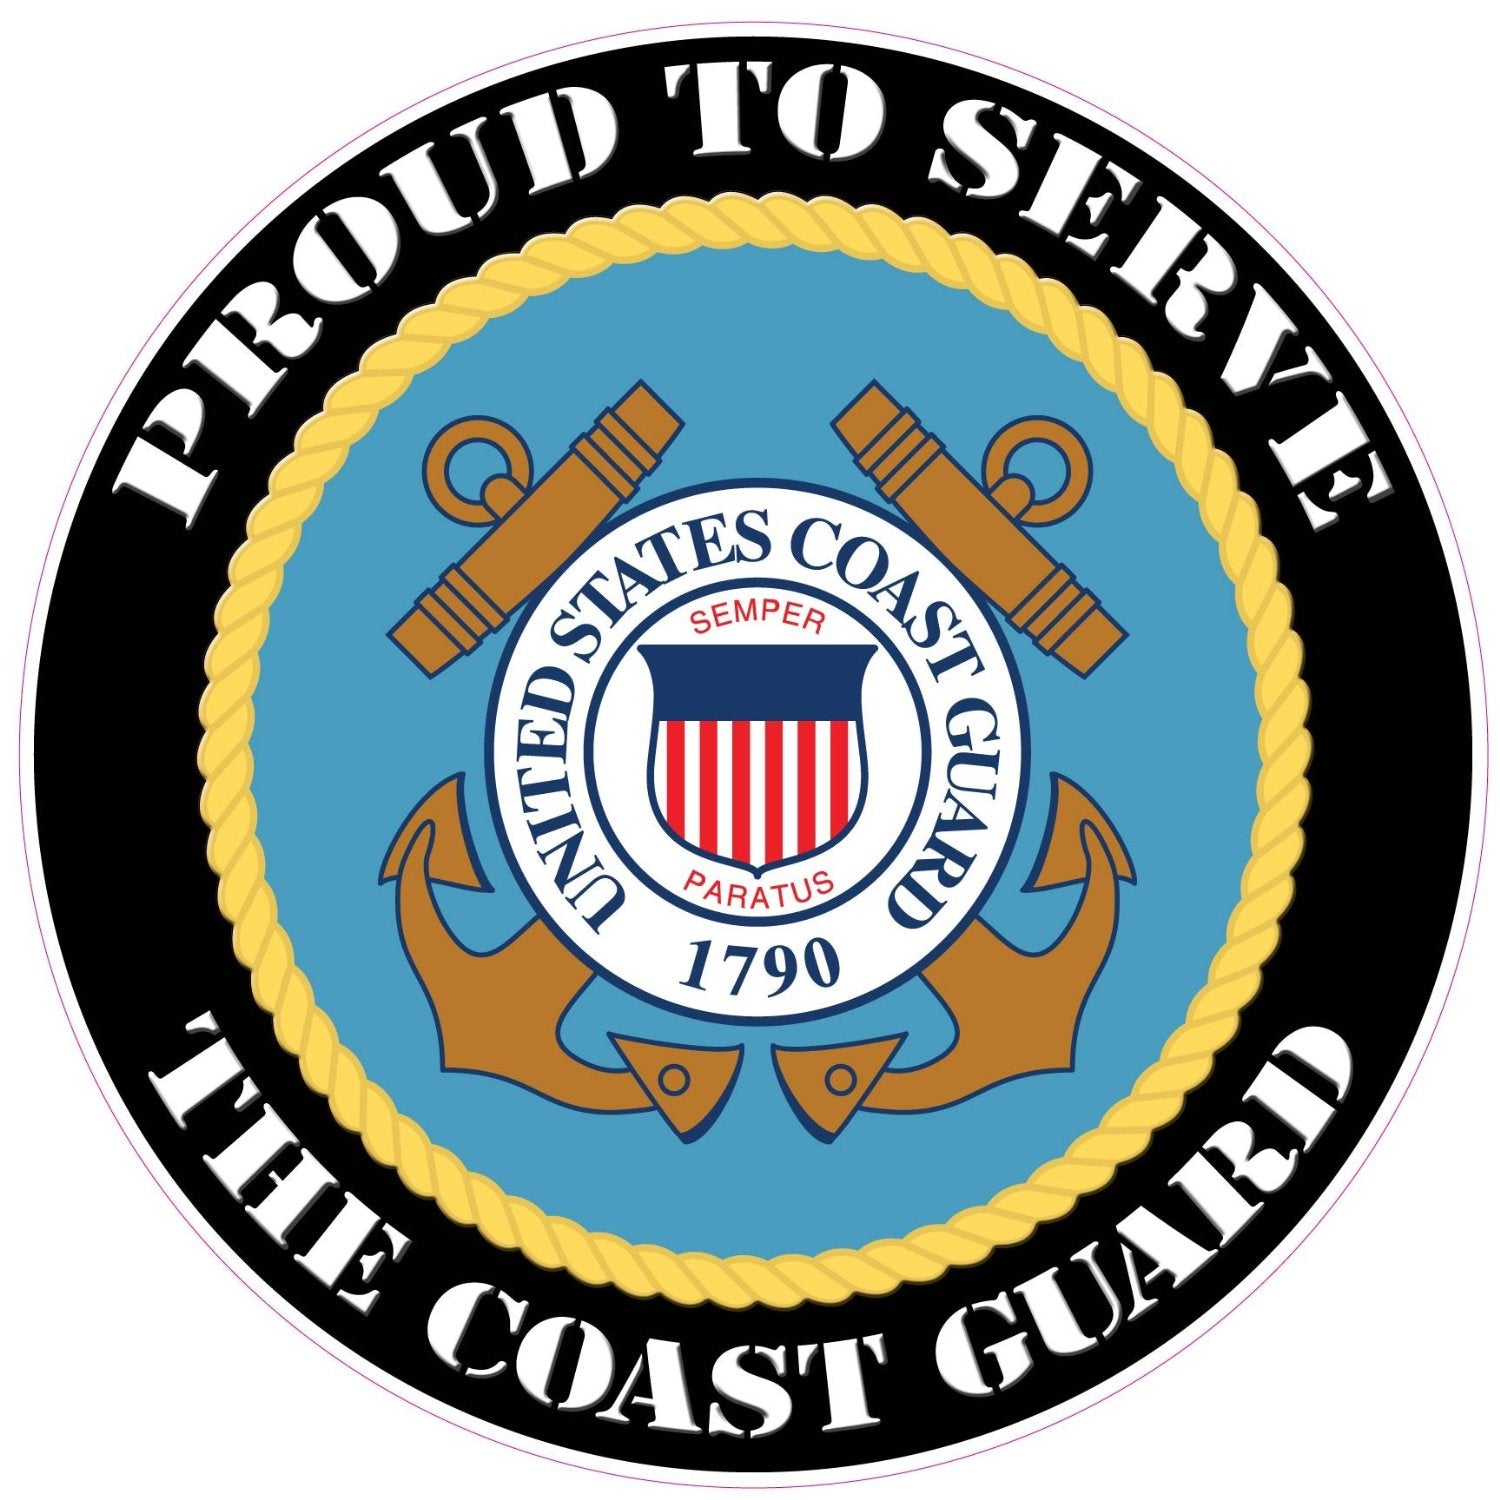 Proud to Serve the Coast Guard Decal - American flag stickers, armed forces stickers, automotive decals, automotive stickers, bumper decals, bumper stickers, coast guard decals, coast guard stickers, Military and Veterans Decals, Military decals, military stickers, Patriotic stickers, Proud to Serve the Coast Guard Decal, proud to seve the Coast Guard Sticker, vehicle decals, Vehicle stickers, window decal, window sticker, window stickers, woo_import_1 | American Patriots Decals | High Quality M